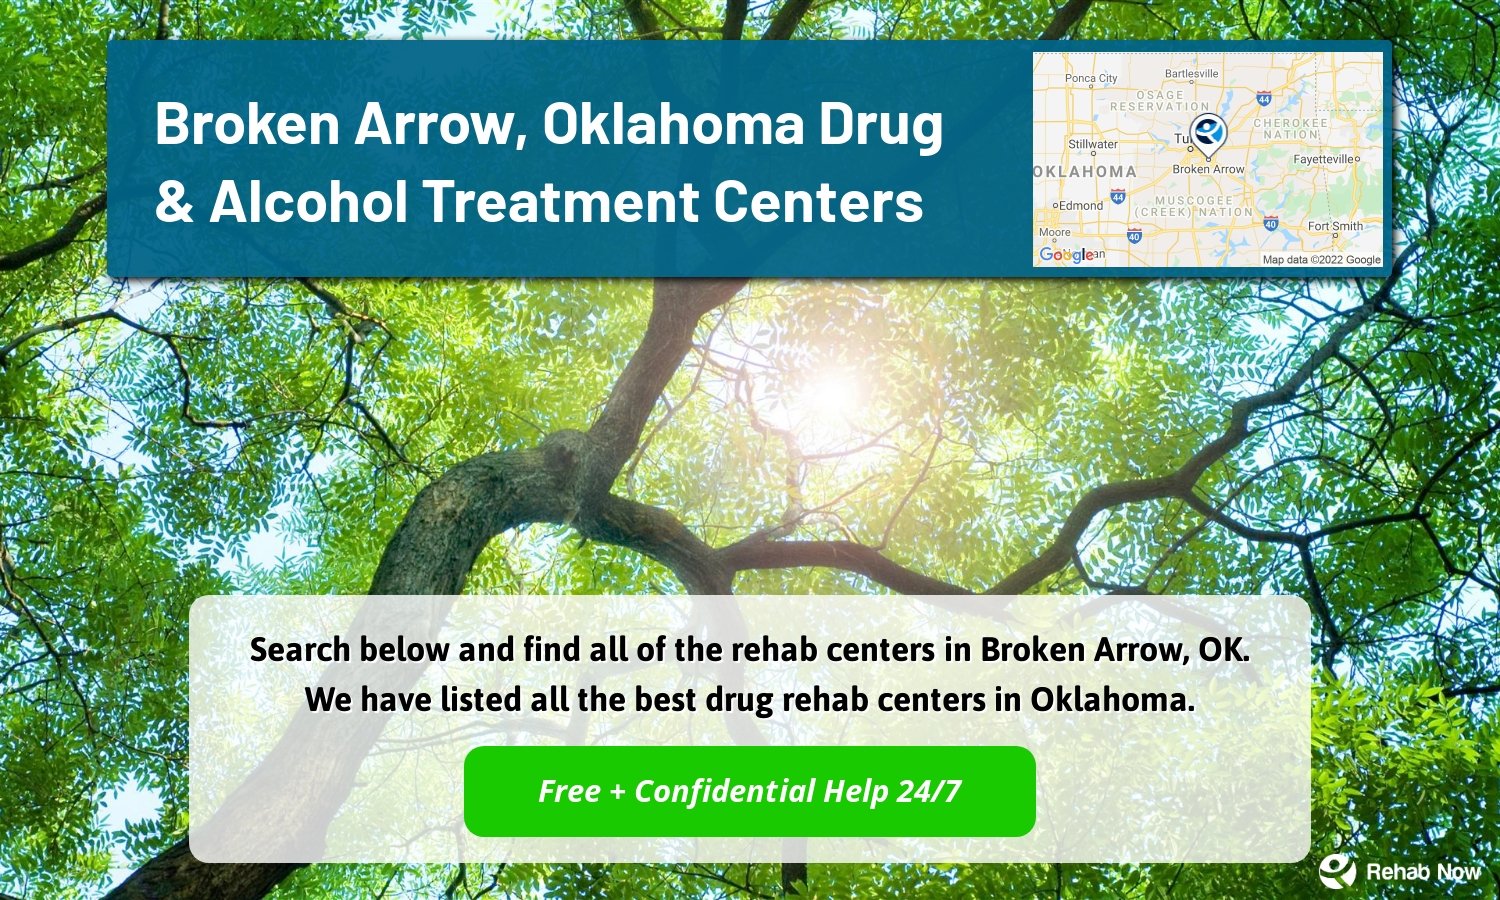 Search below and find all of the rehab centers in Broken Arrow, OK. We have listed all the best drug rehab centers in Oklahoma.